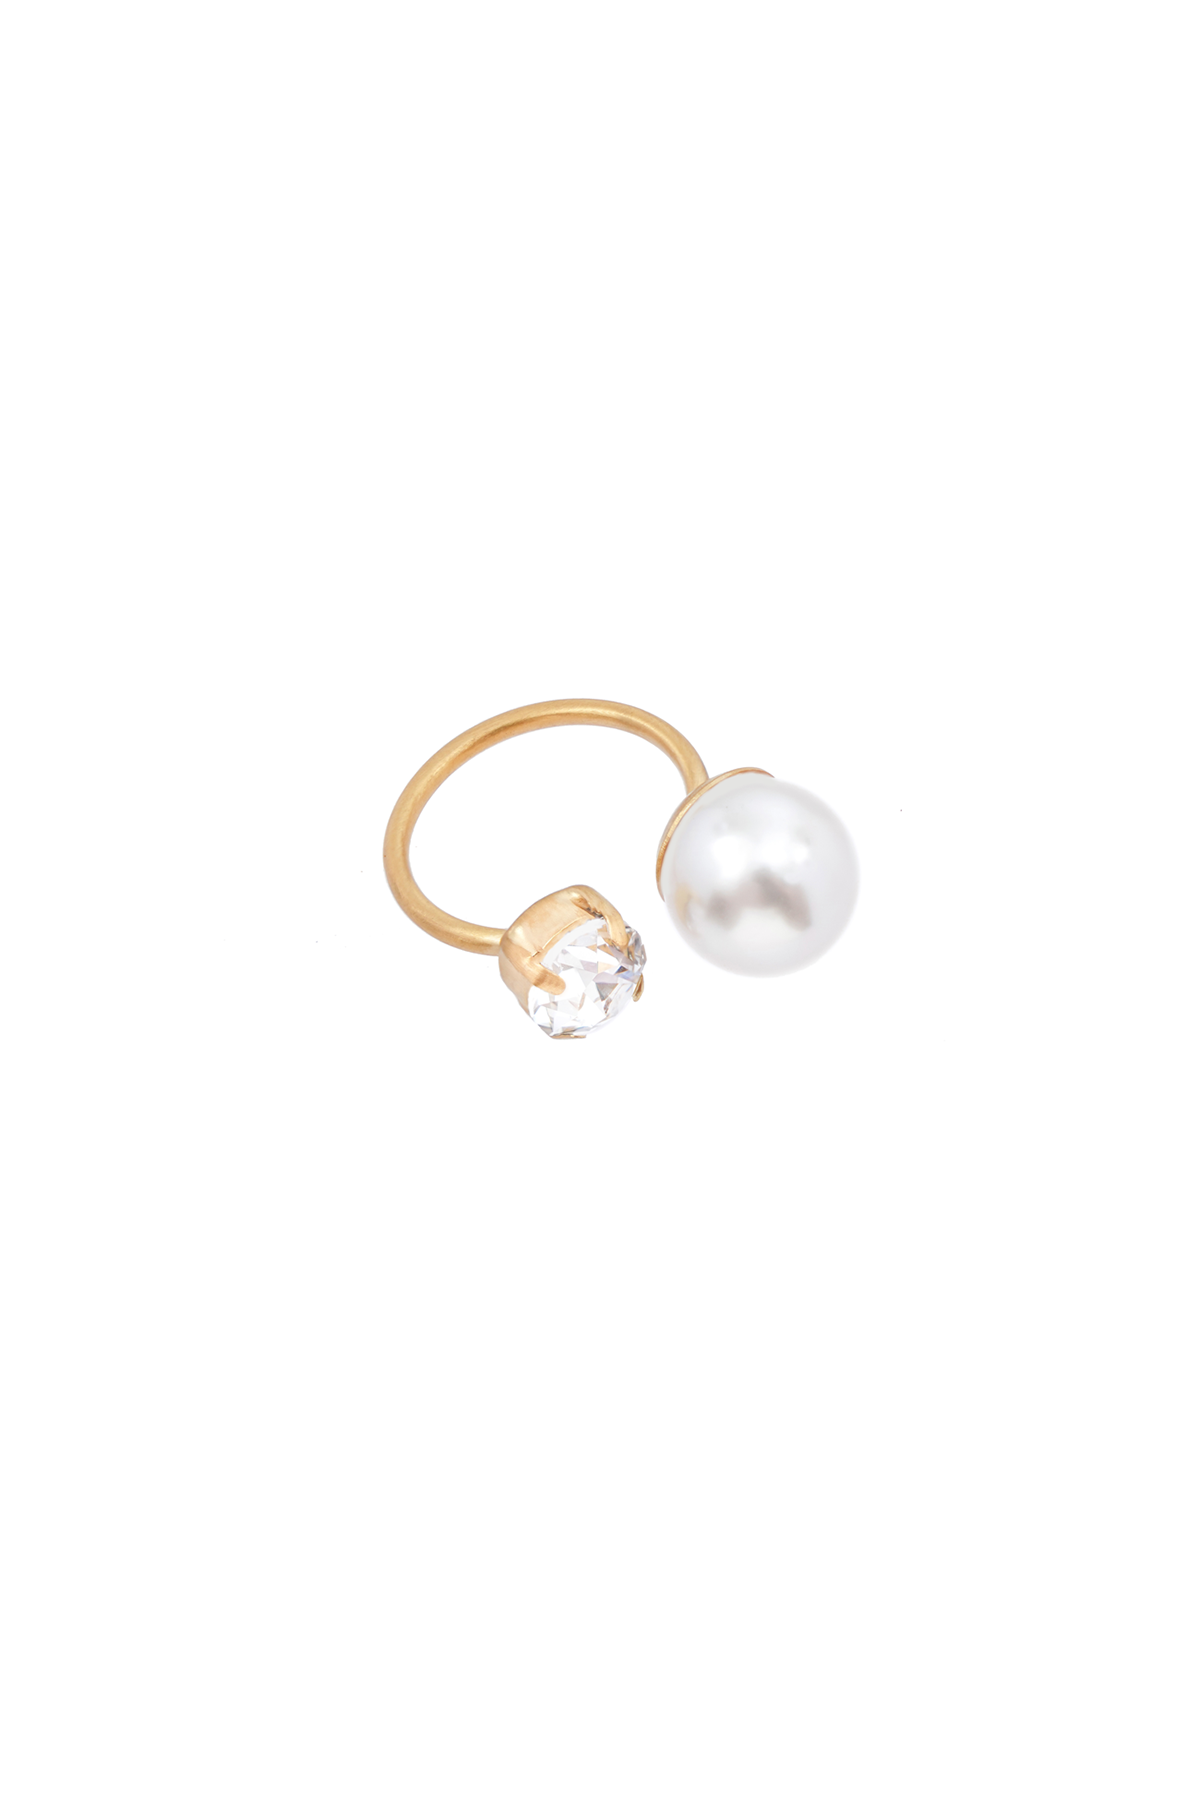 Ivy pearl ring - Adjustable